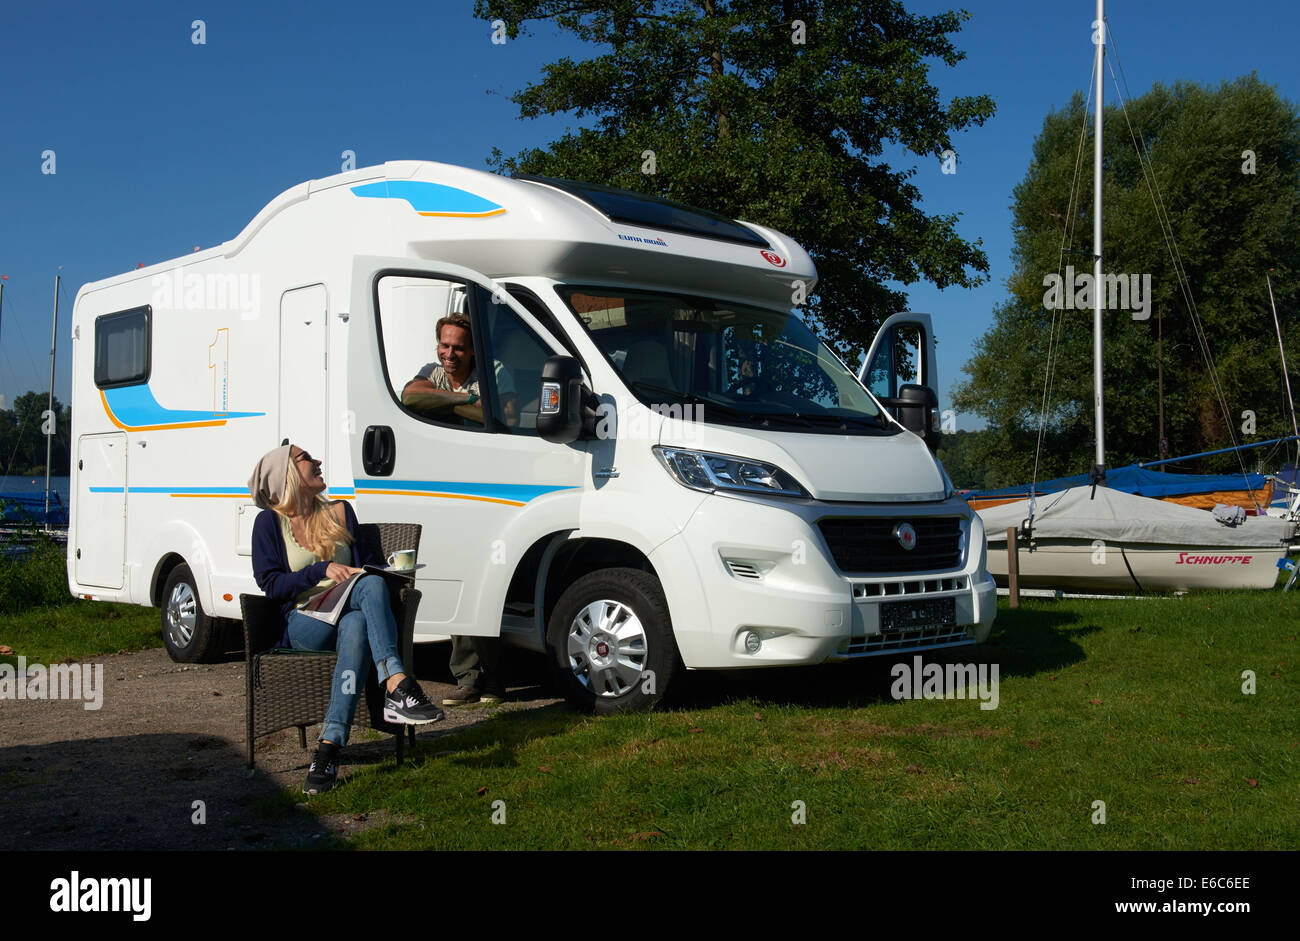 Models Chrissi and Stefan sit in front of a Eura Mobil 'Profila One 690 EB'  camper which is based on the new Fiat Ducato during the preview of the  trade show Caravan-Salon